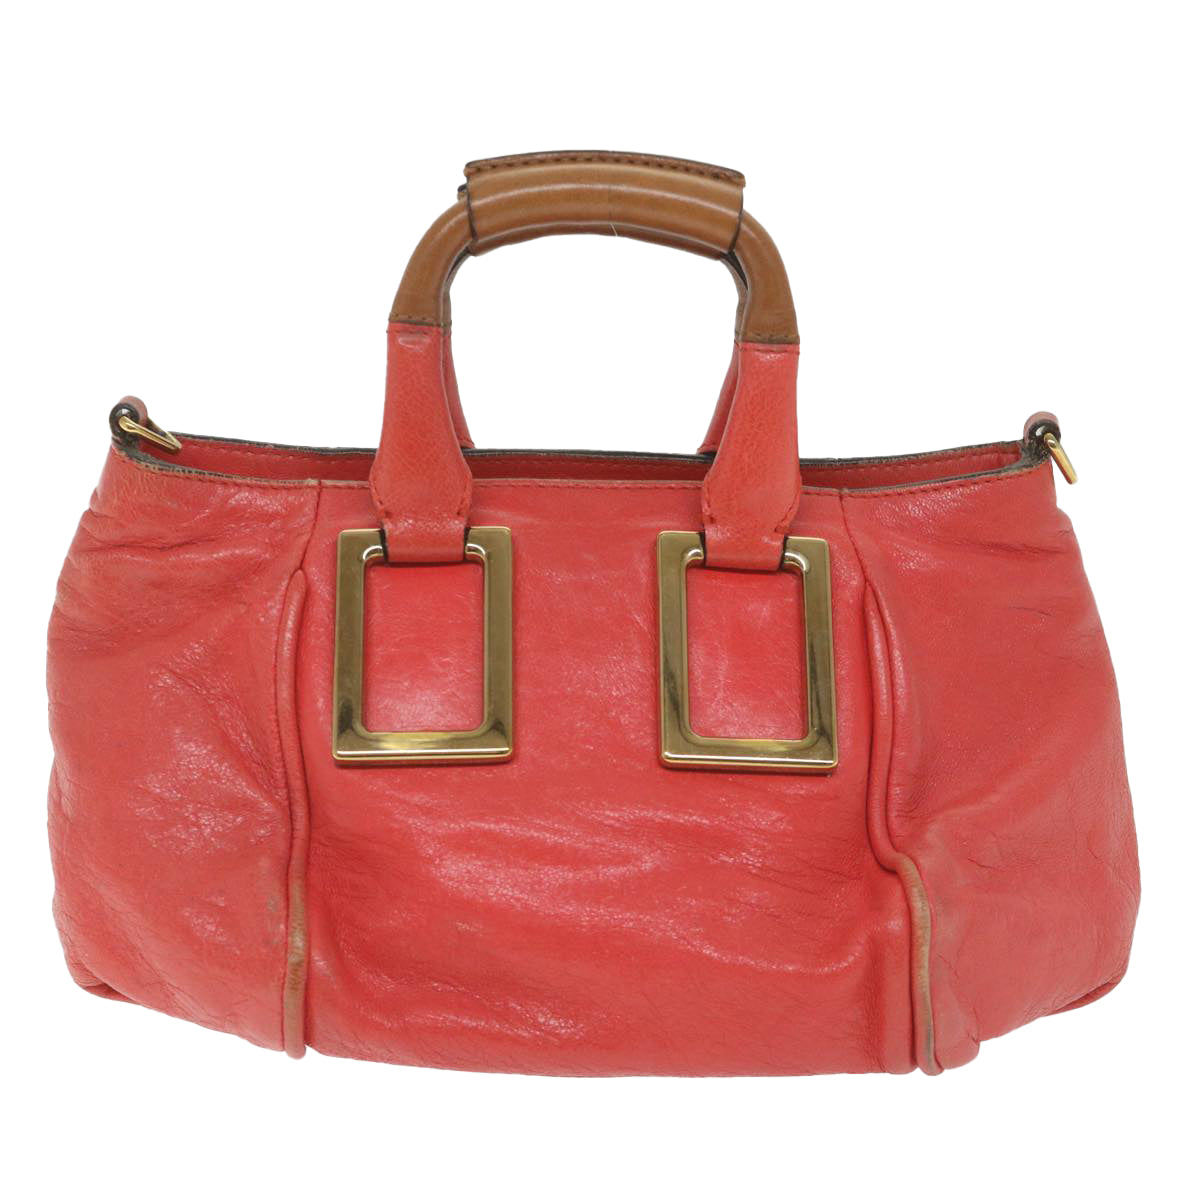 Chloe Etel Hand Bag Leather 2way Red 01 12 50 65 Auth ar10713